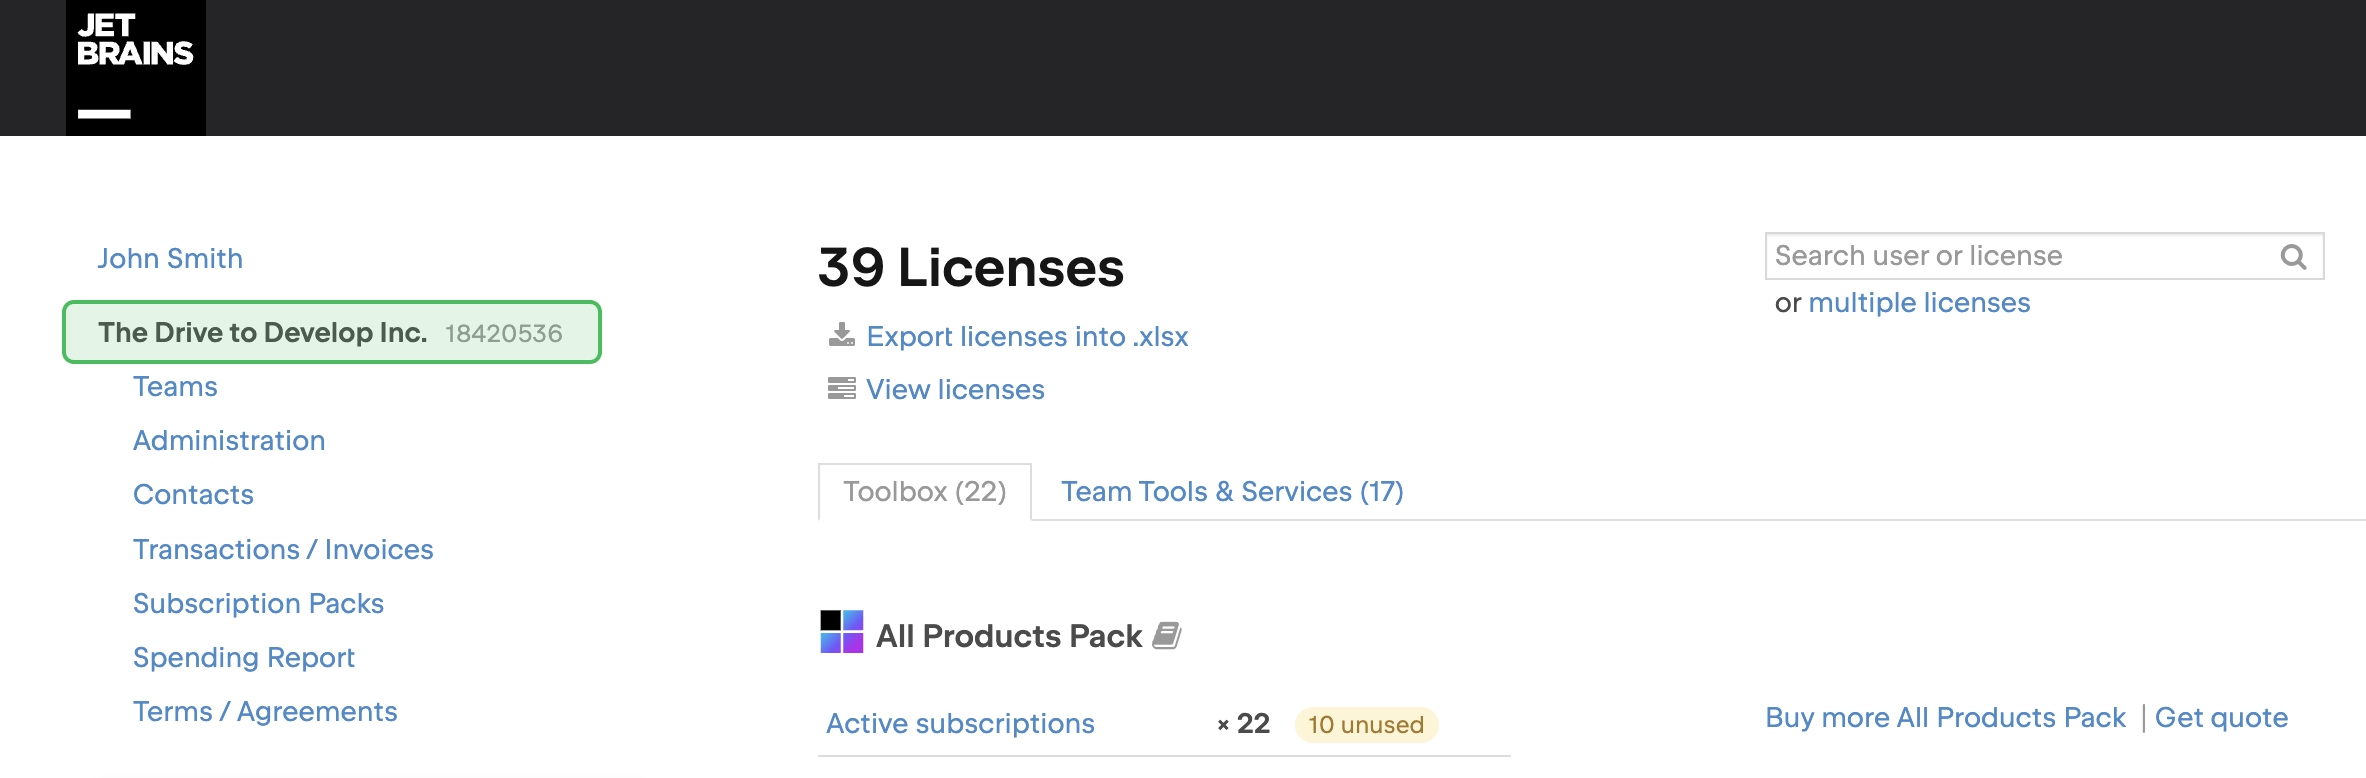 The menu item to access your company's profile from your JetBrains Account